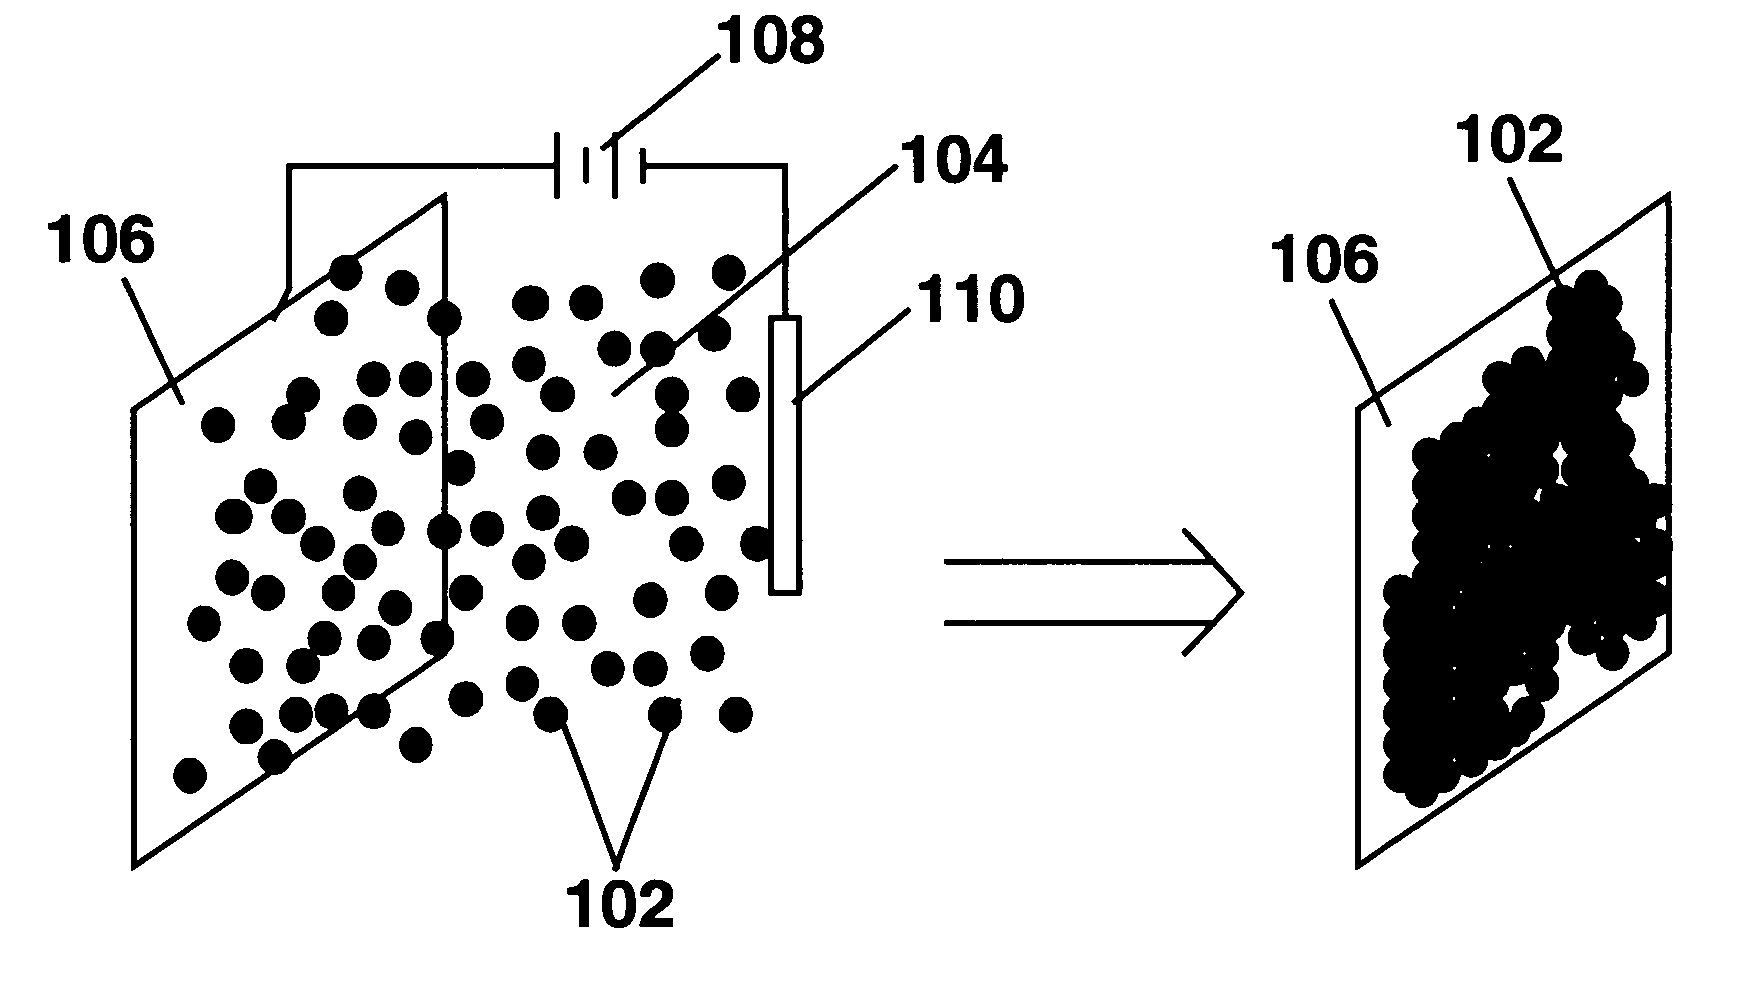 Processes for the production of electrophoretic displays